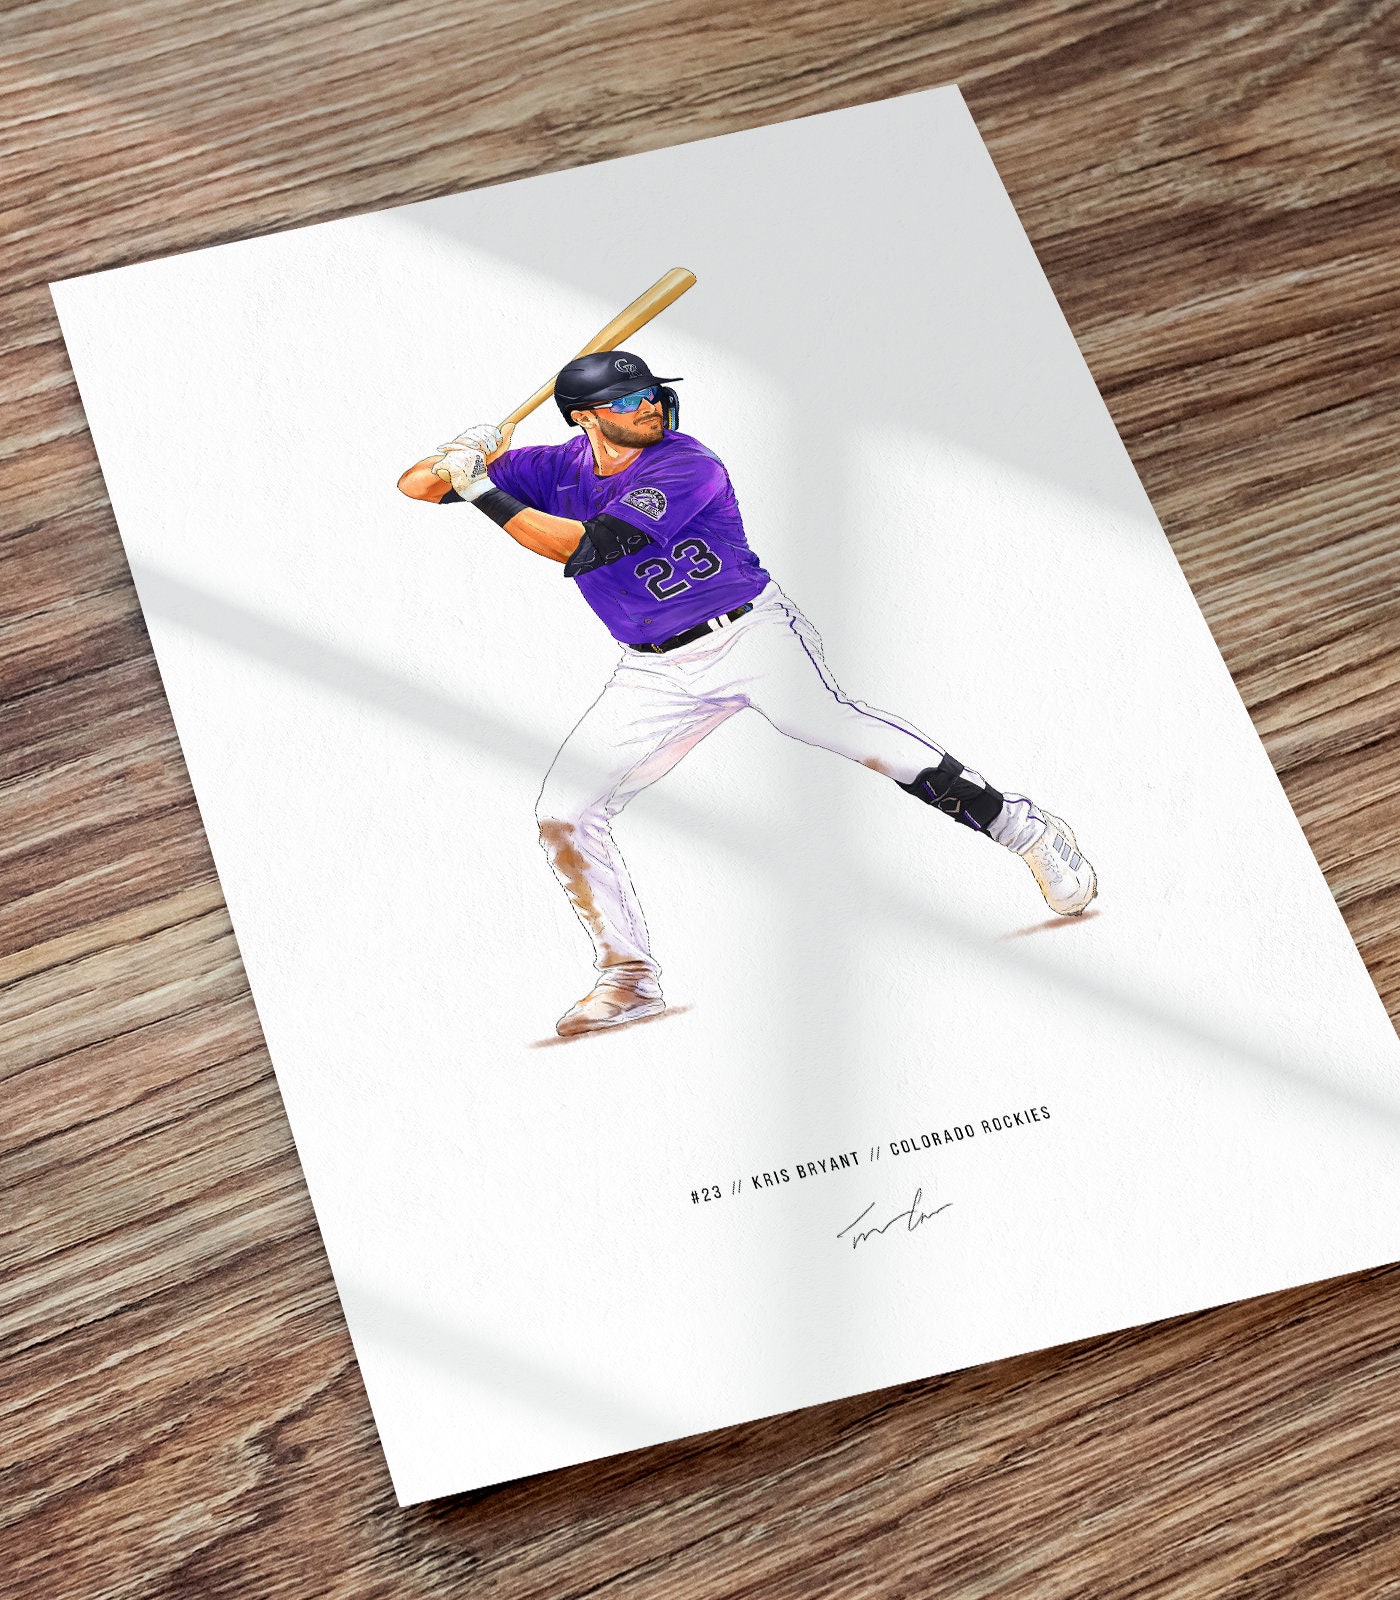 Colorado Rockies: Kris Bryant 2022 Poster - Officially Licensed